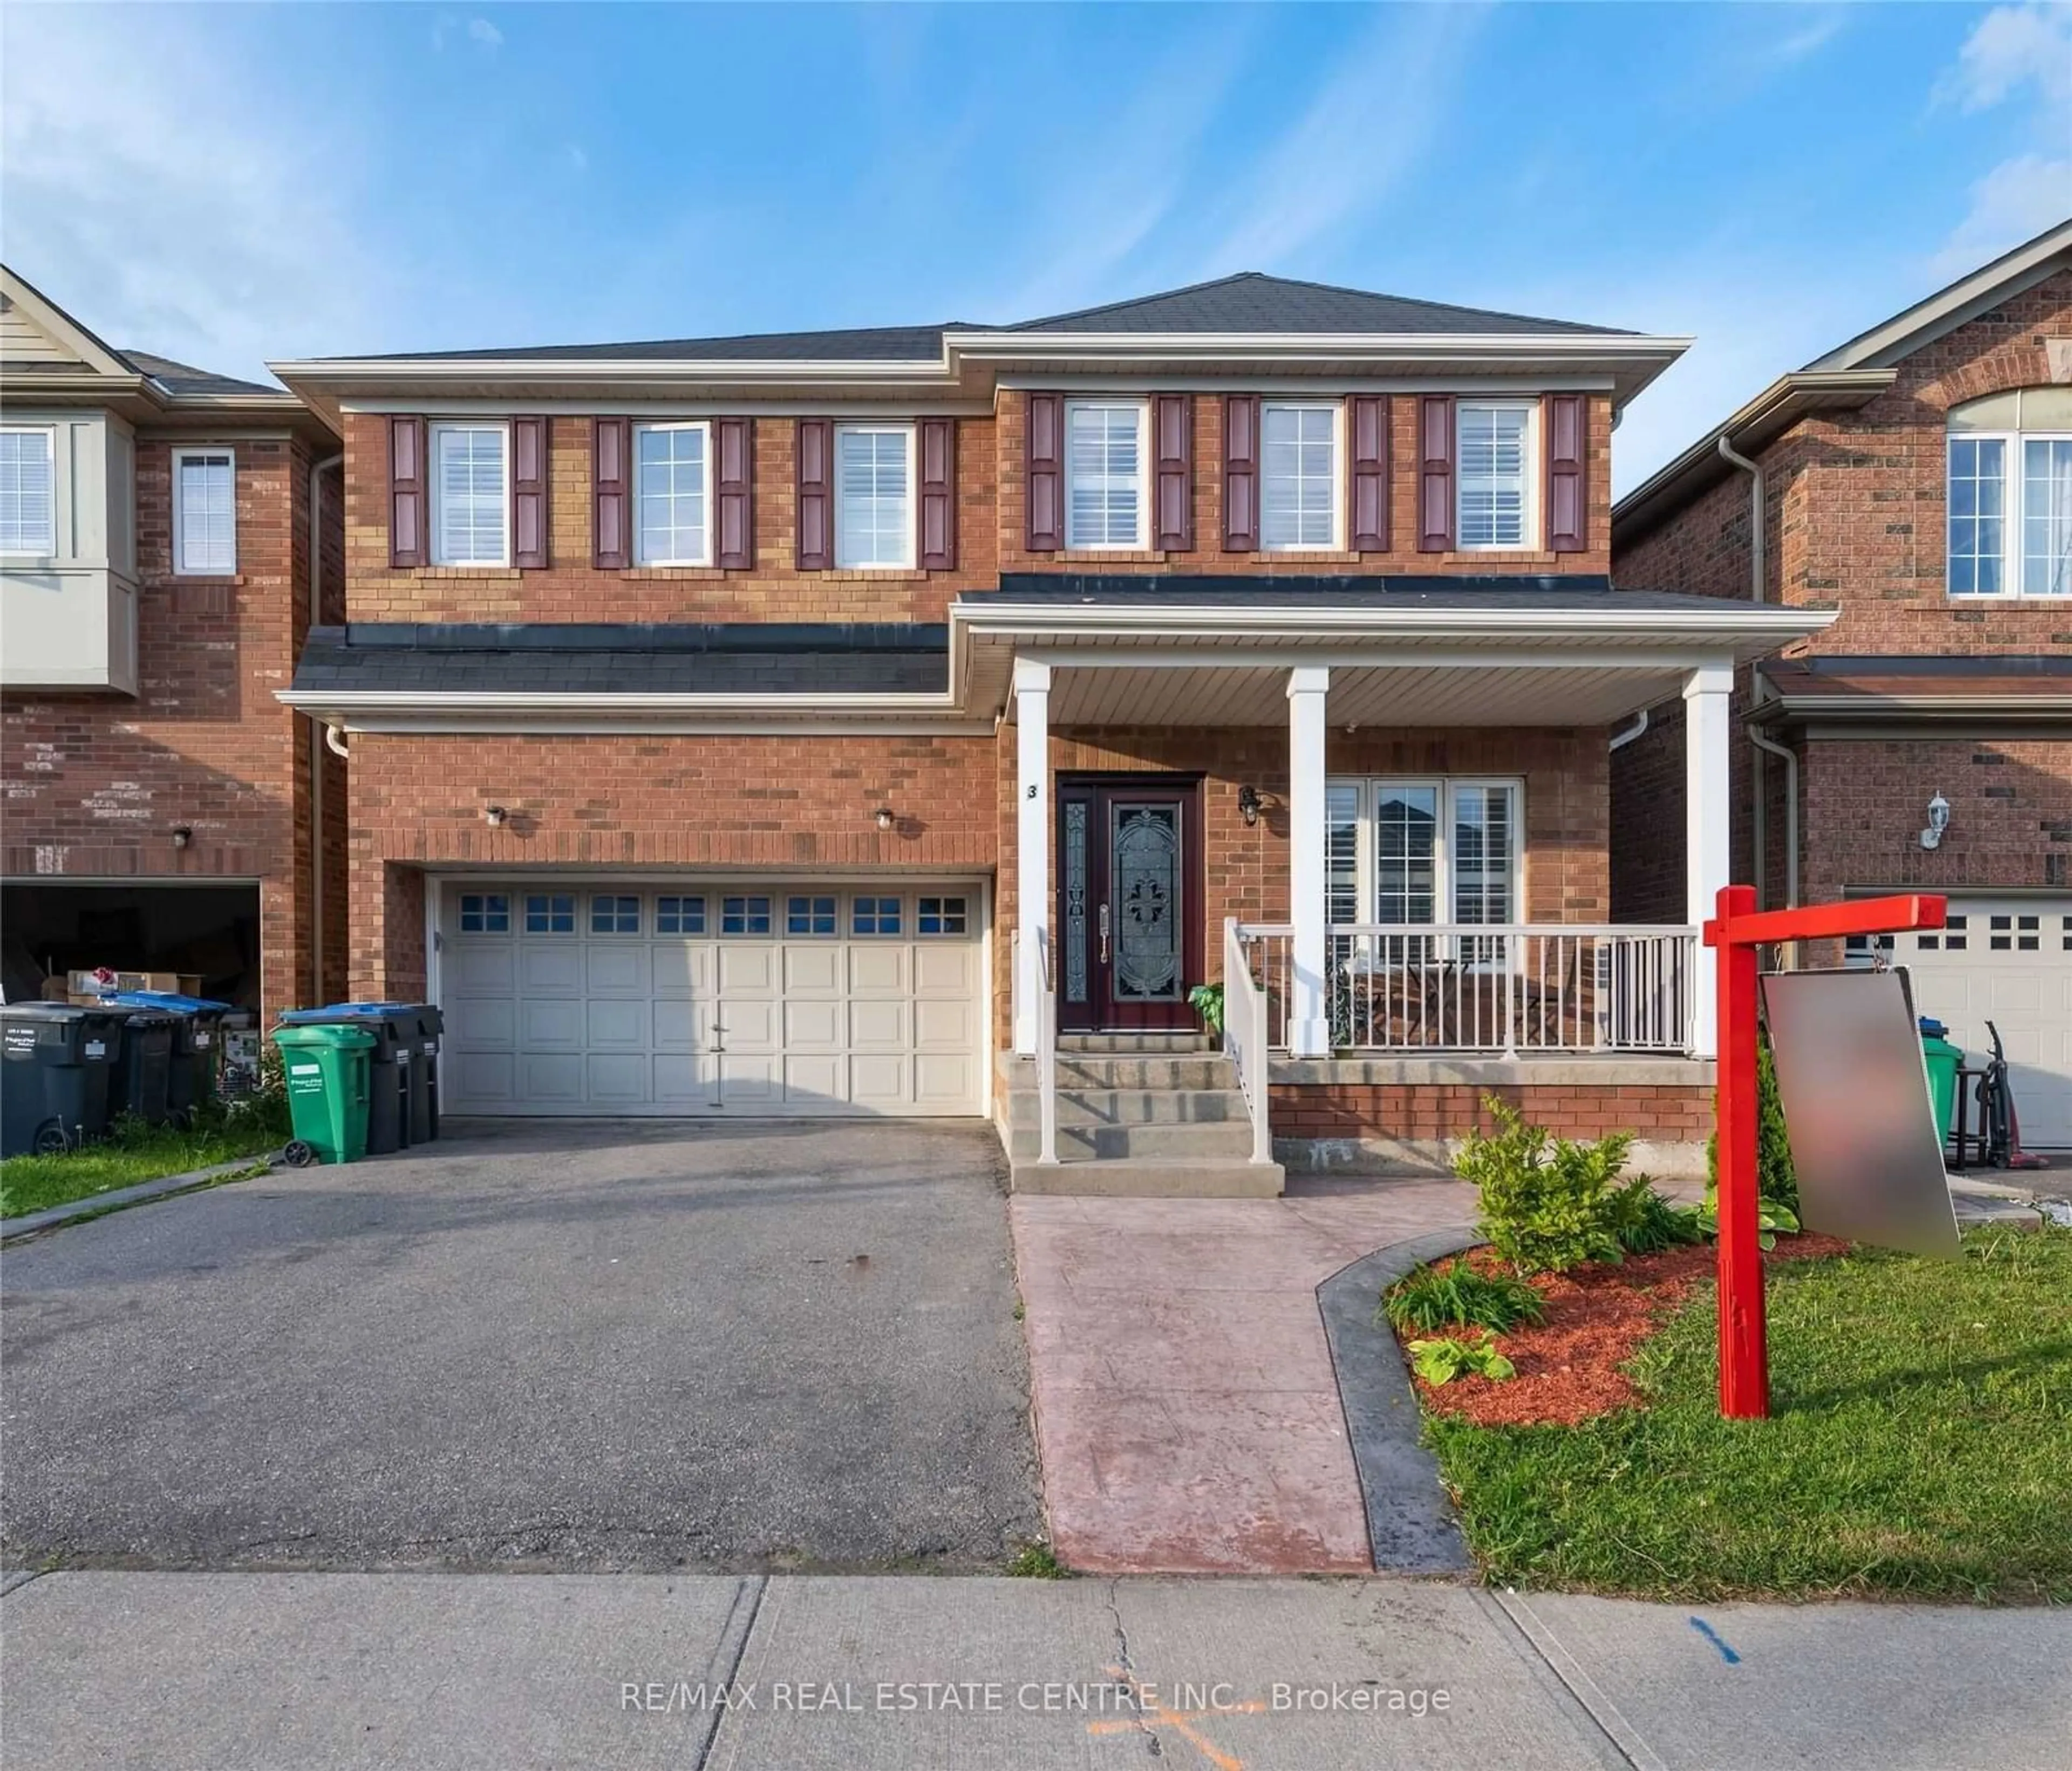 Home with brick exterior material for 3 Abbotsbury Dr, Brampton Ontario L6X 0S3